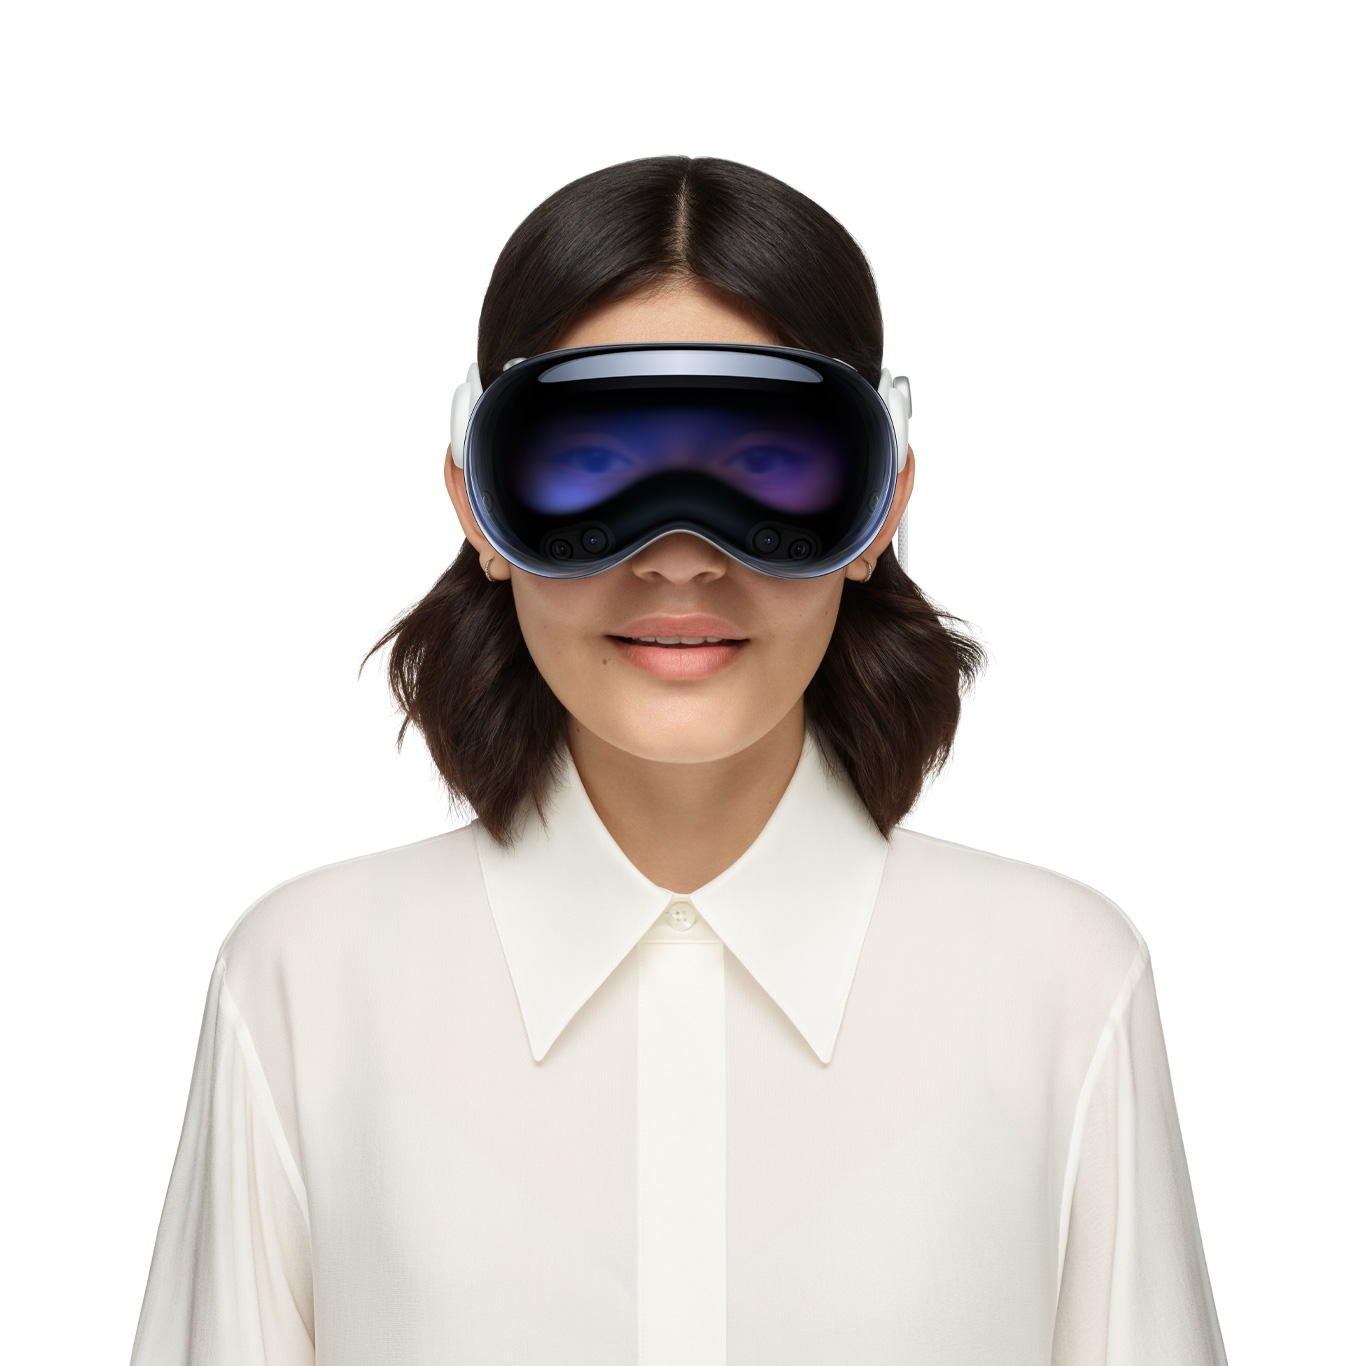 Person wearing Apple Vision Pro, with eyes revealed through an outward display